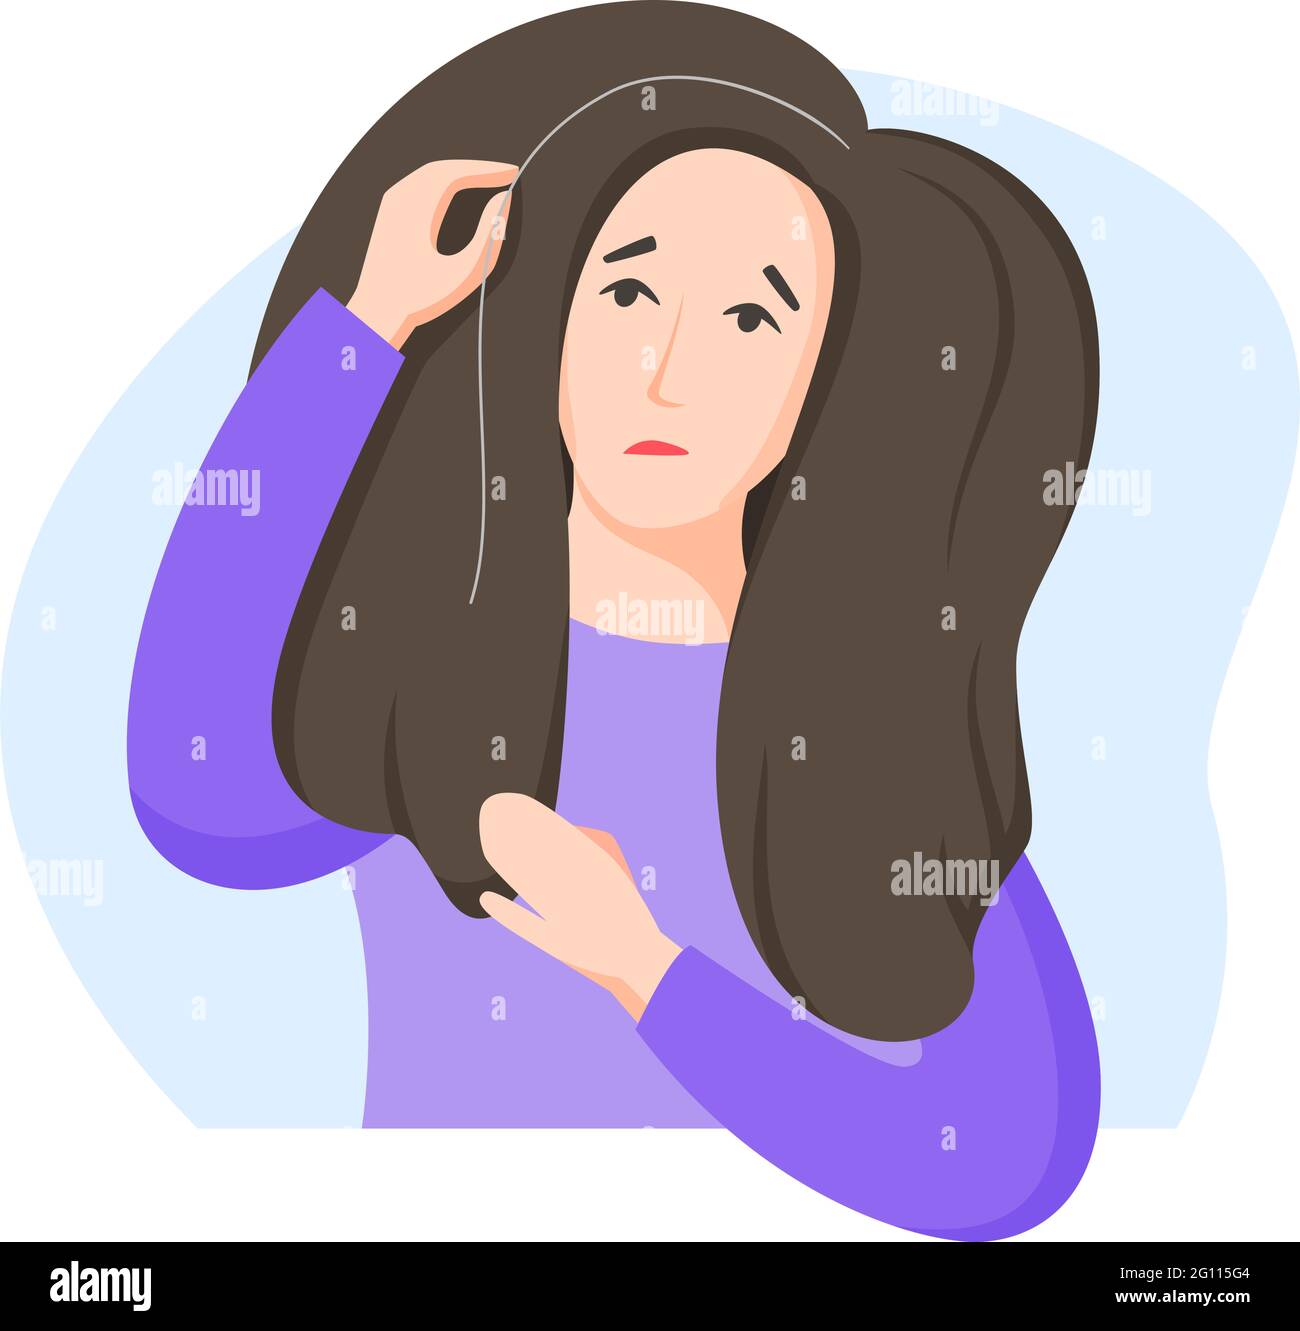 Woman found grey hair, worry about getting old and turning grey, dissatisfaction with oneself, appearance-related social pressure and ageism issue, fl Stock Vector